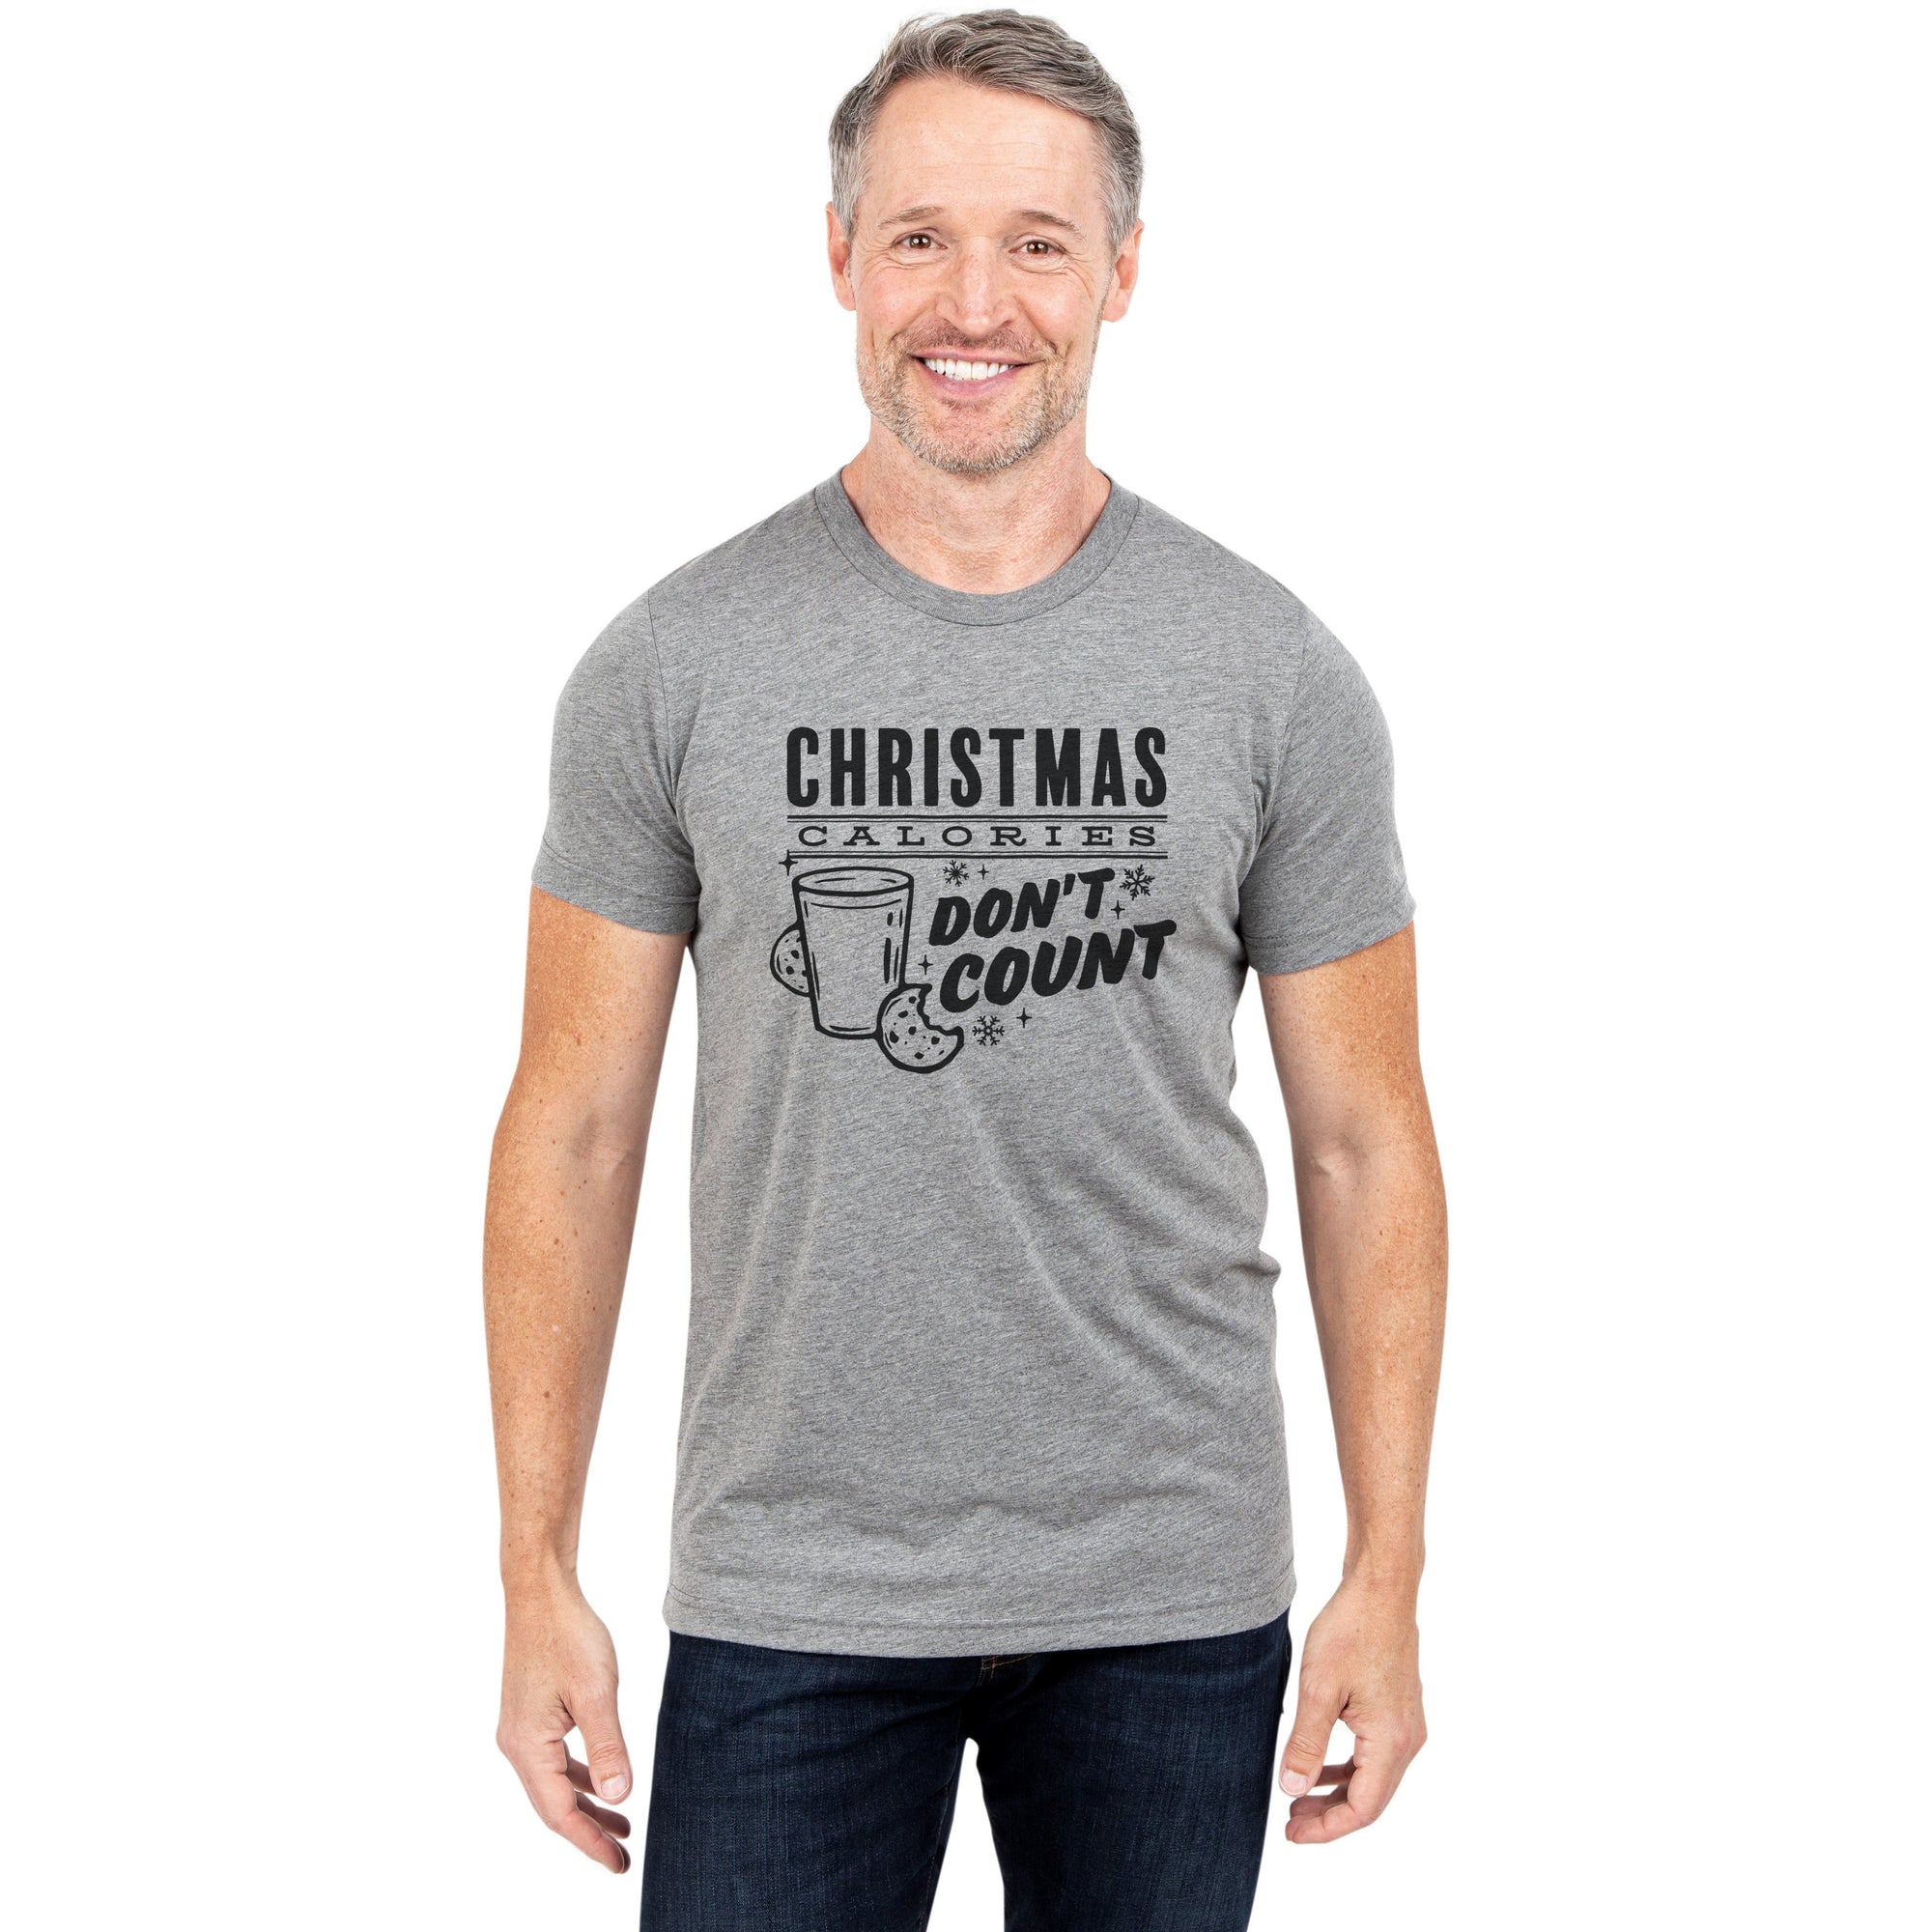 Christmas Calories Don't Count Heather Grey Printed Graphic Men's Crew T-Shirt Tee Model